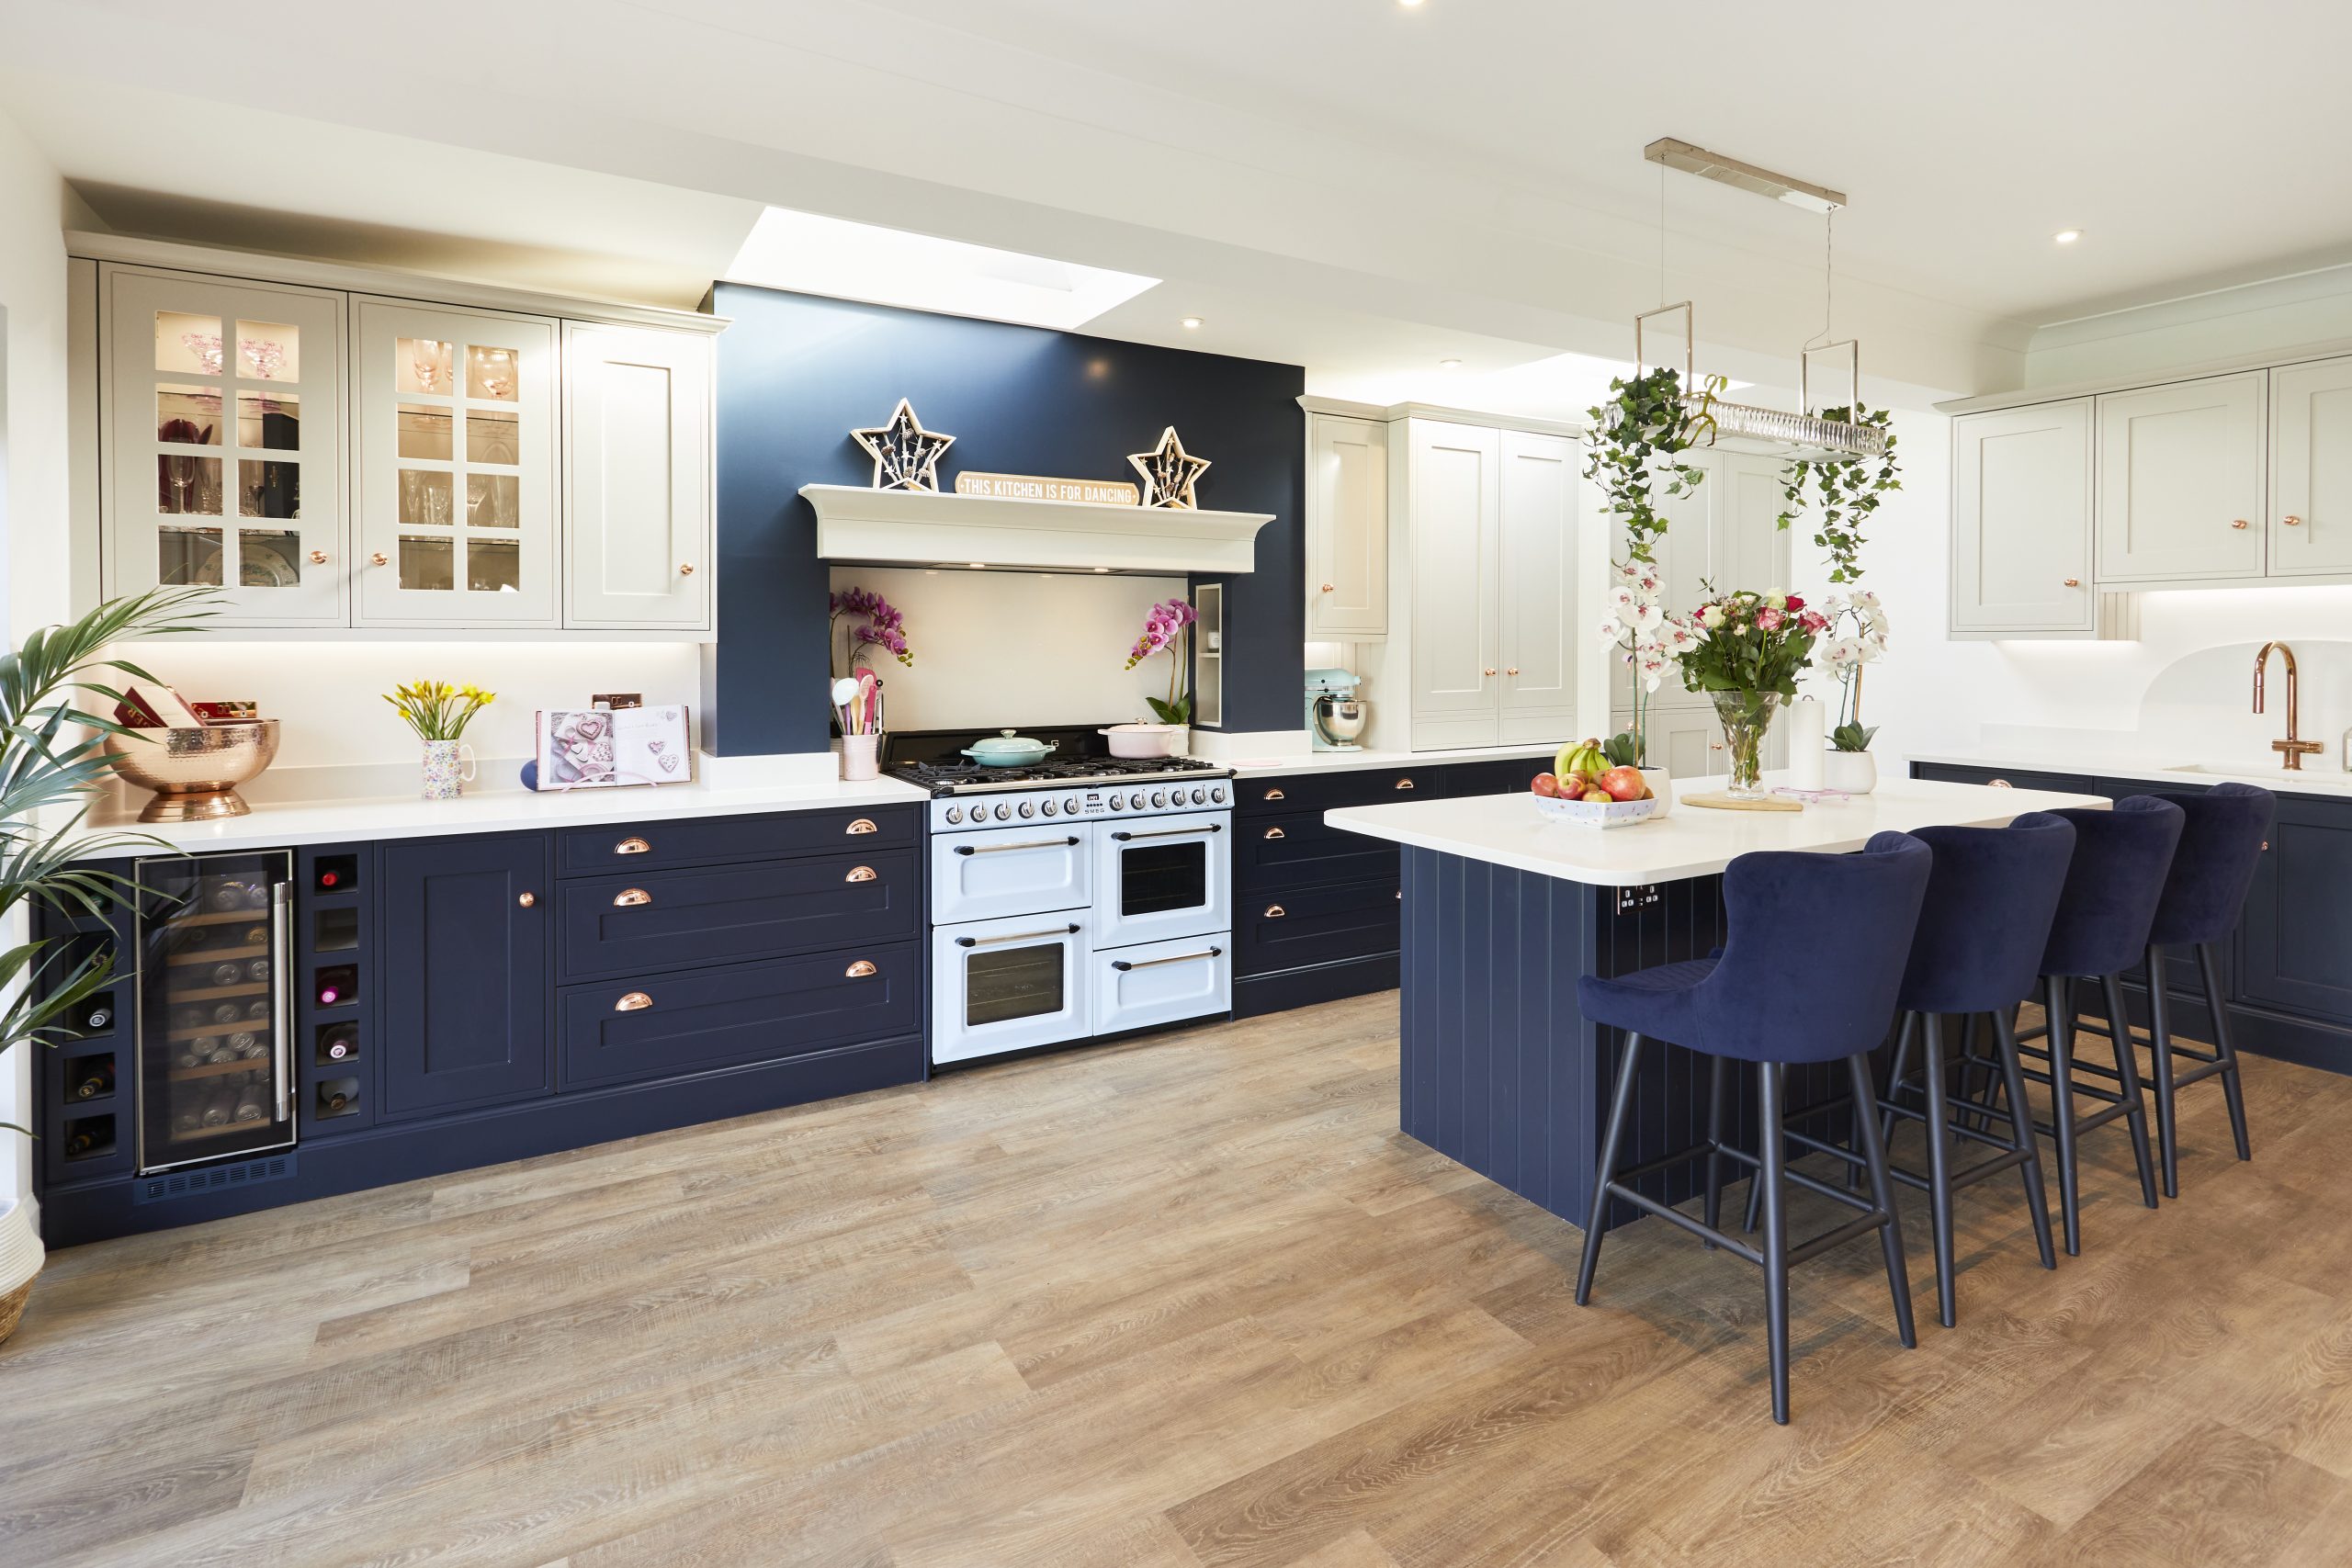 Open Plan Designs; A Modern Take on Traditional Kitchen Diners